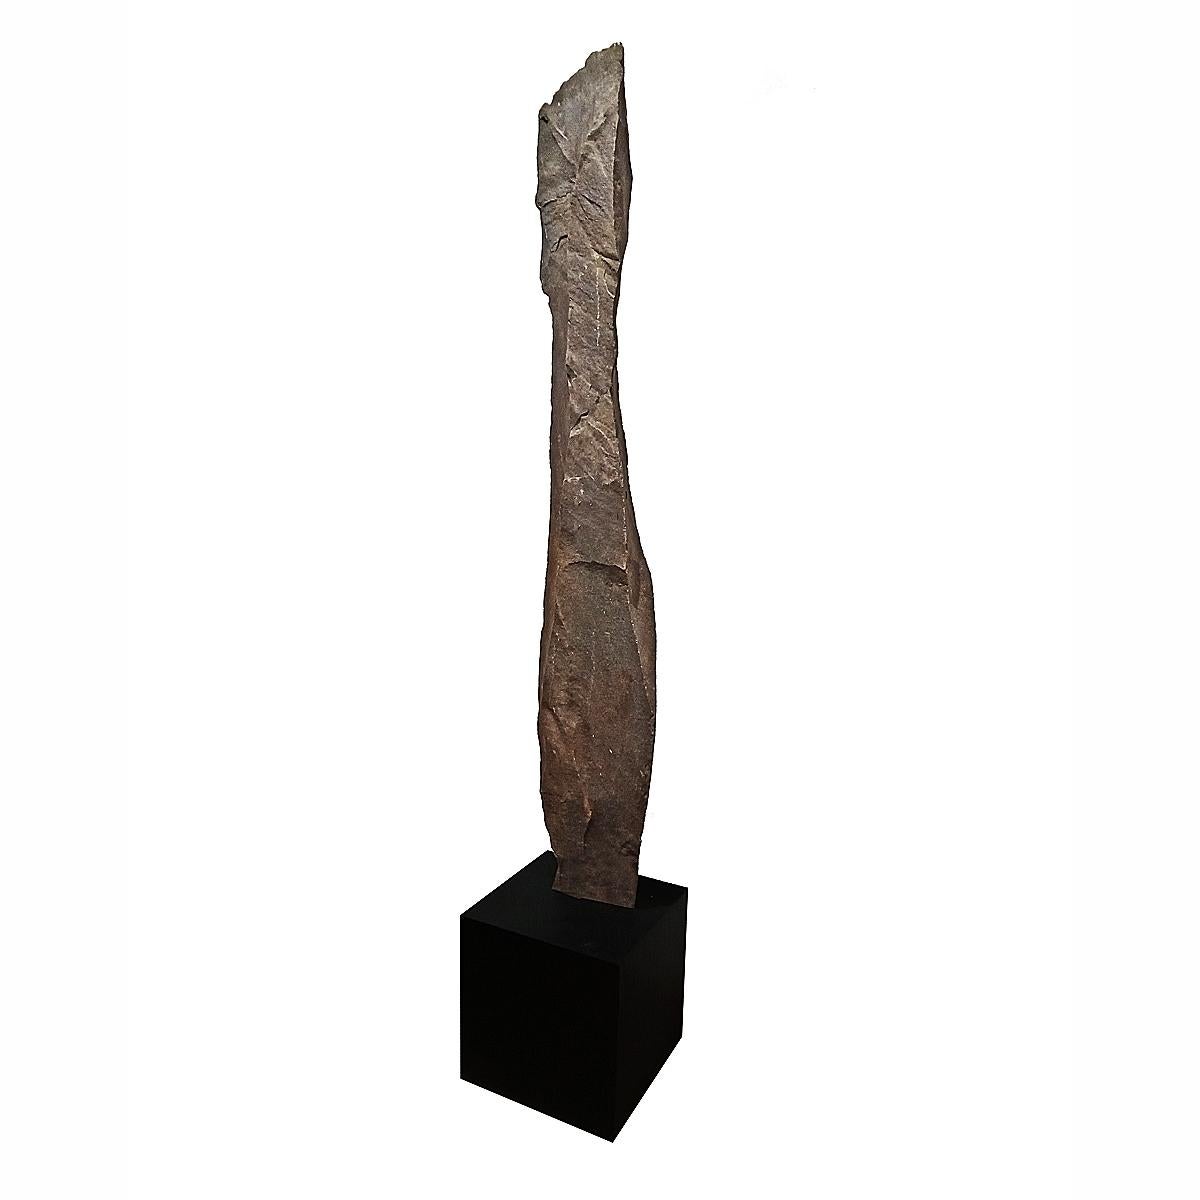 A tall stone sculpture hand-carved in Indonesia, mounted on a black metal cube stand. Narrow slate. The sculpture itself is 10